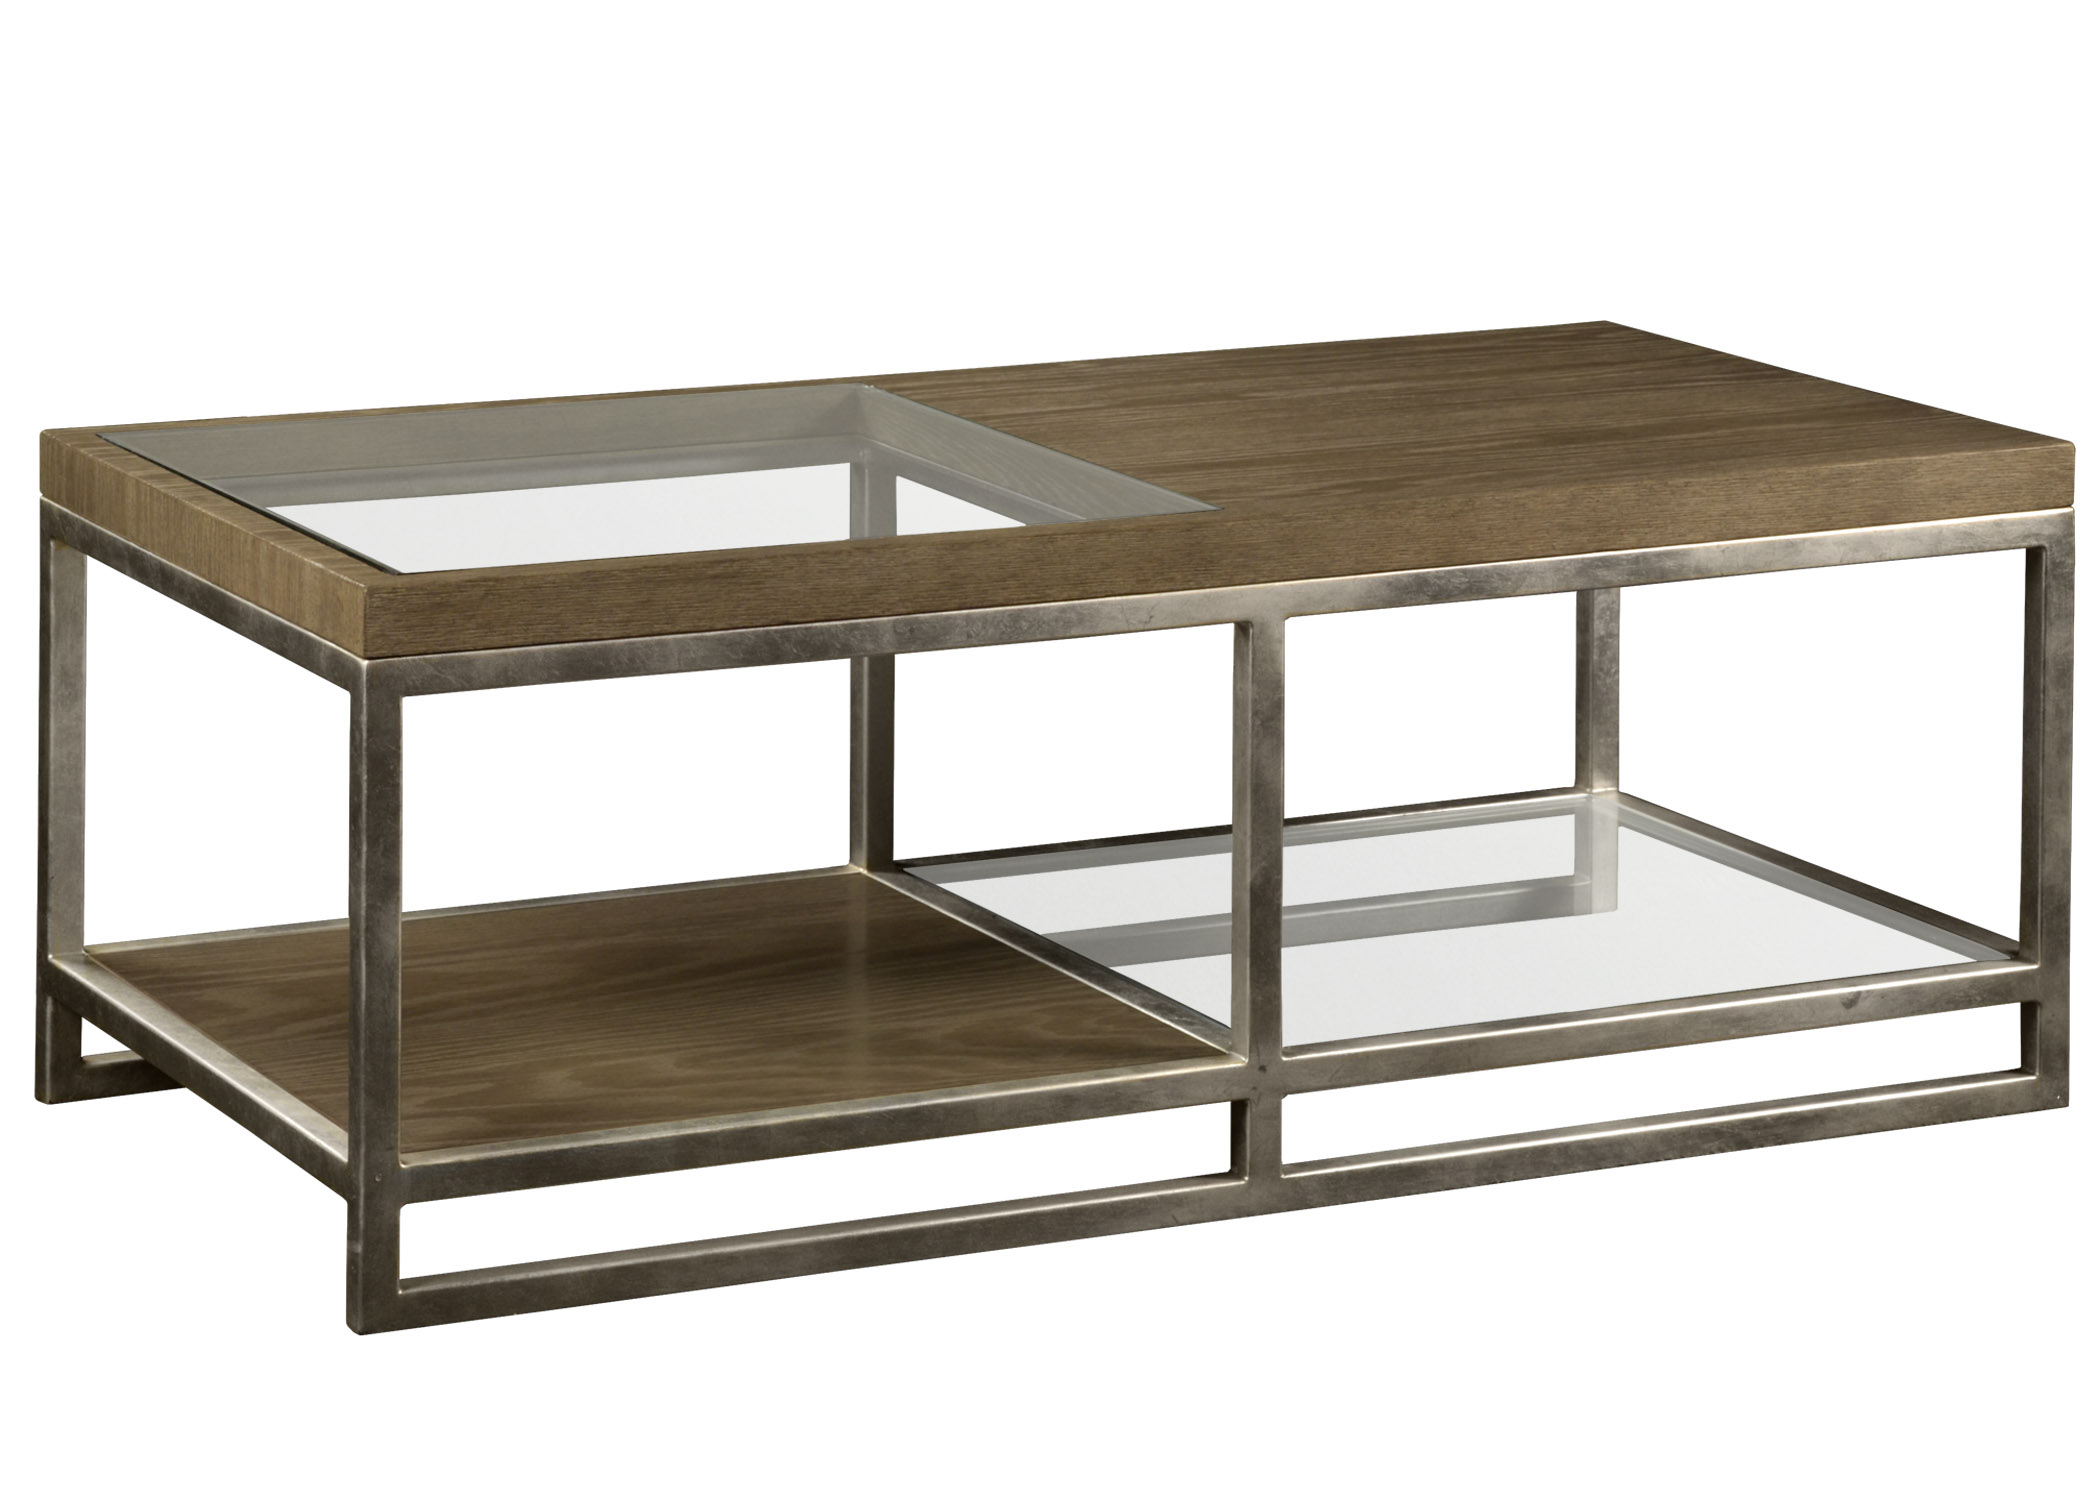 Murray contemporary / modern / transtional metal and wood cocktail or coffee table by Woodland furniture in Idaho Falls USA